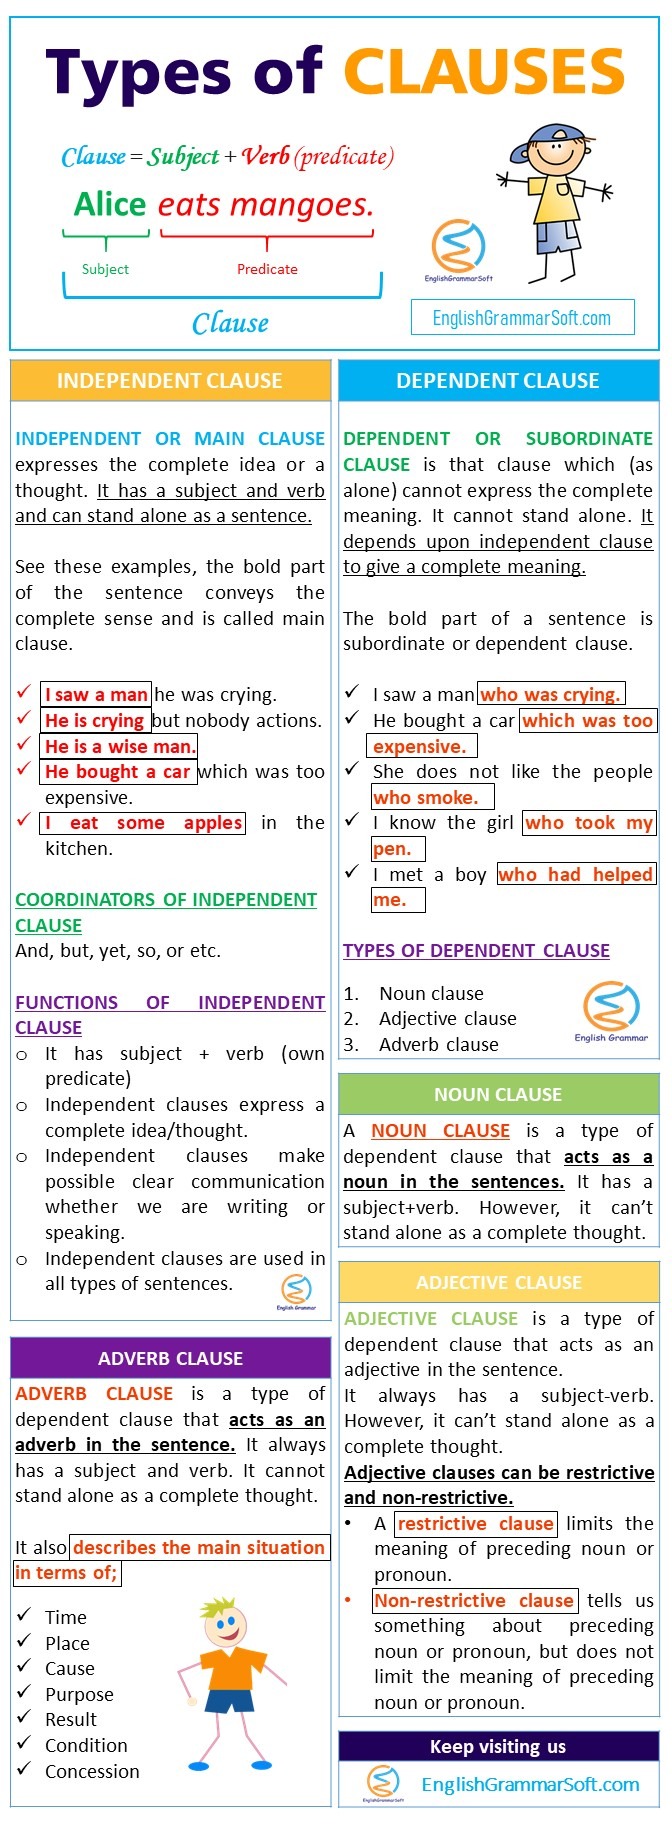 Different types of clauses with examples